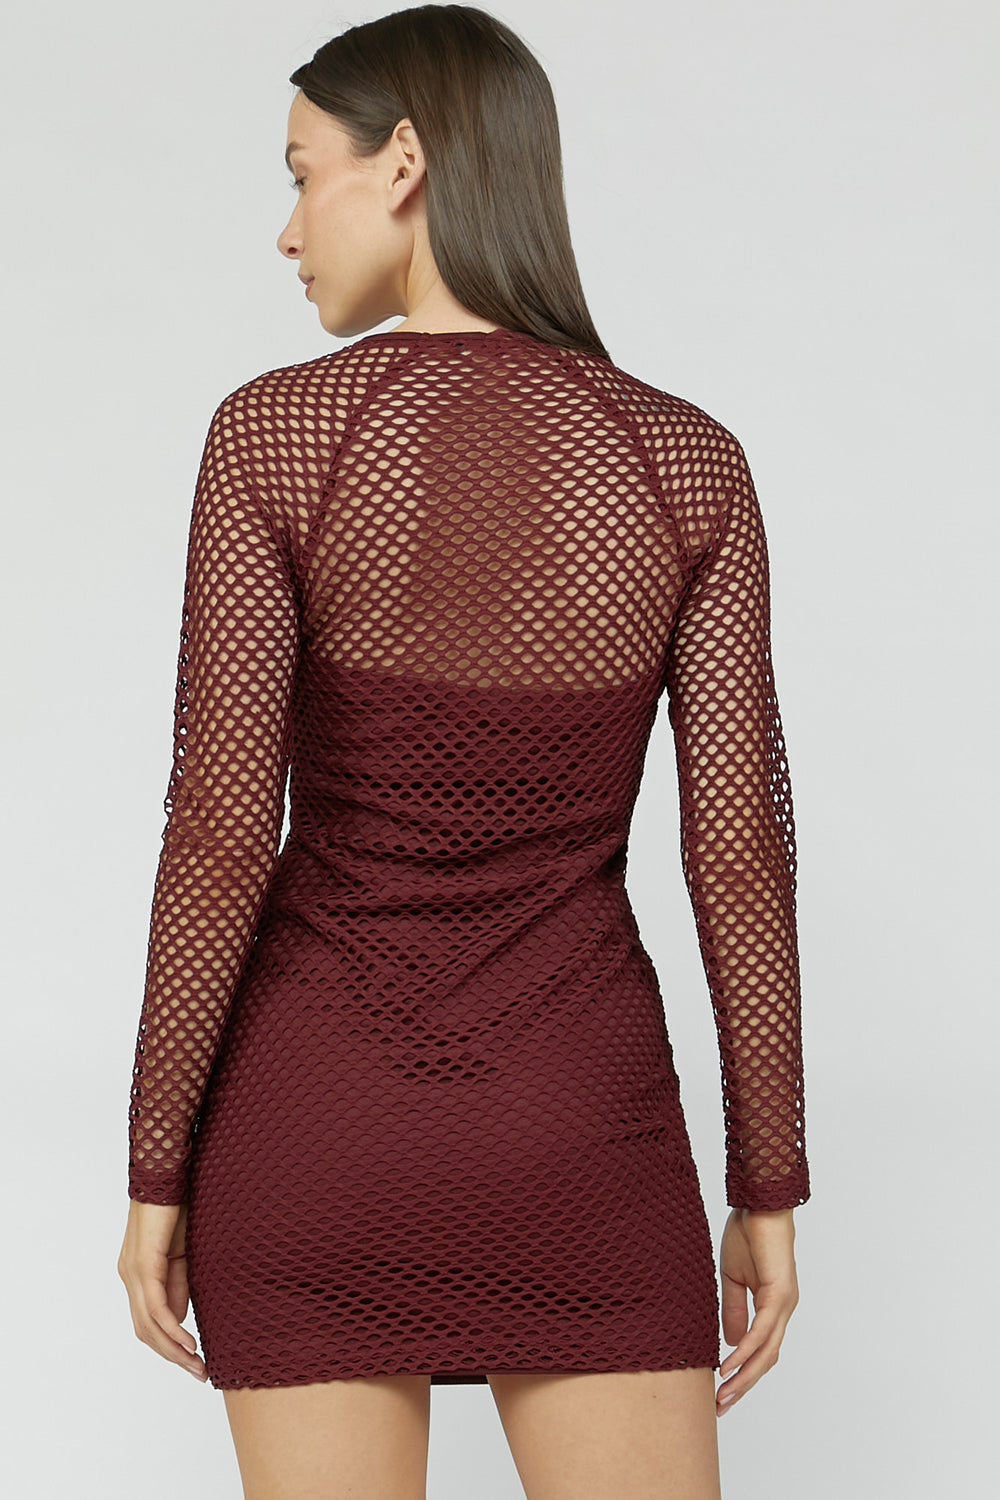 Netted Mesh Long Sleeves Bodycon Dress Wine